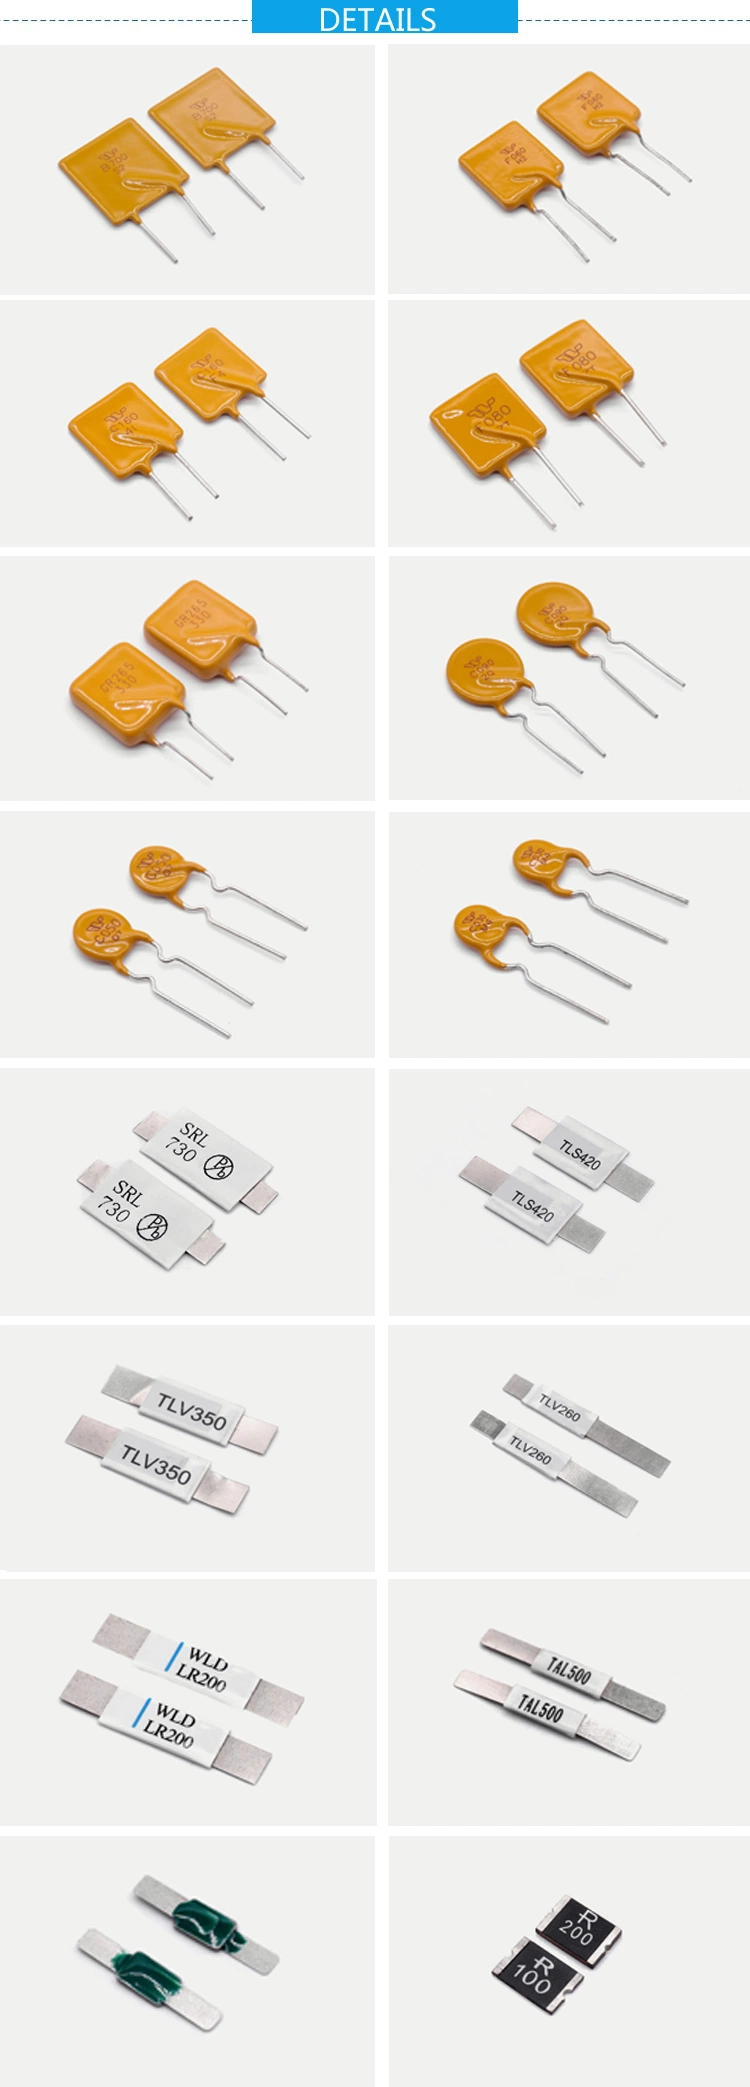 Overcurrent Protect Polyswitch Resettable PPTC PTC Fuse